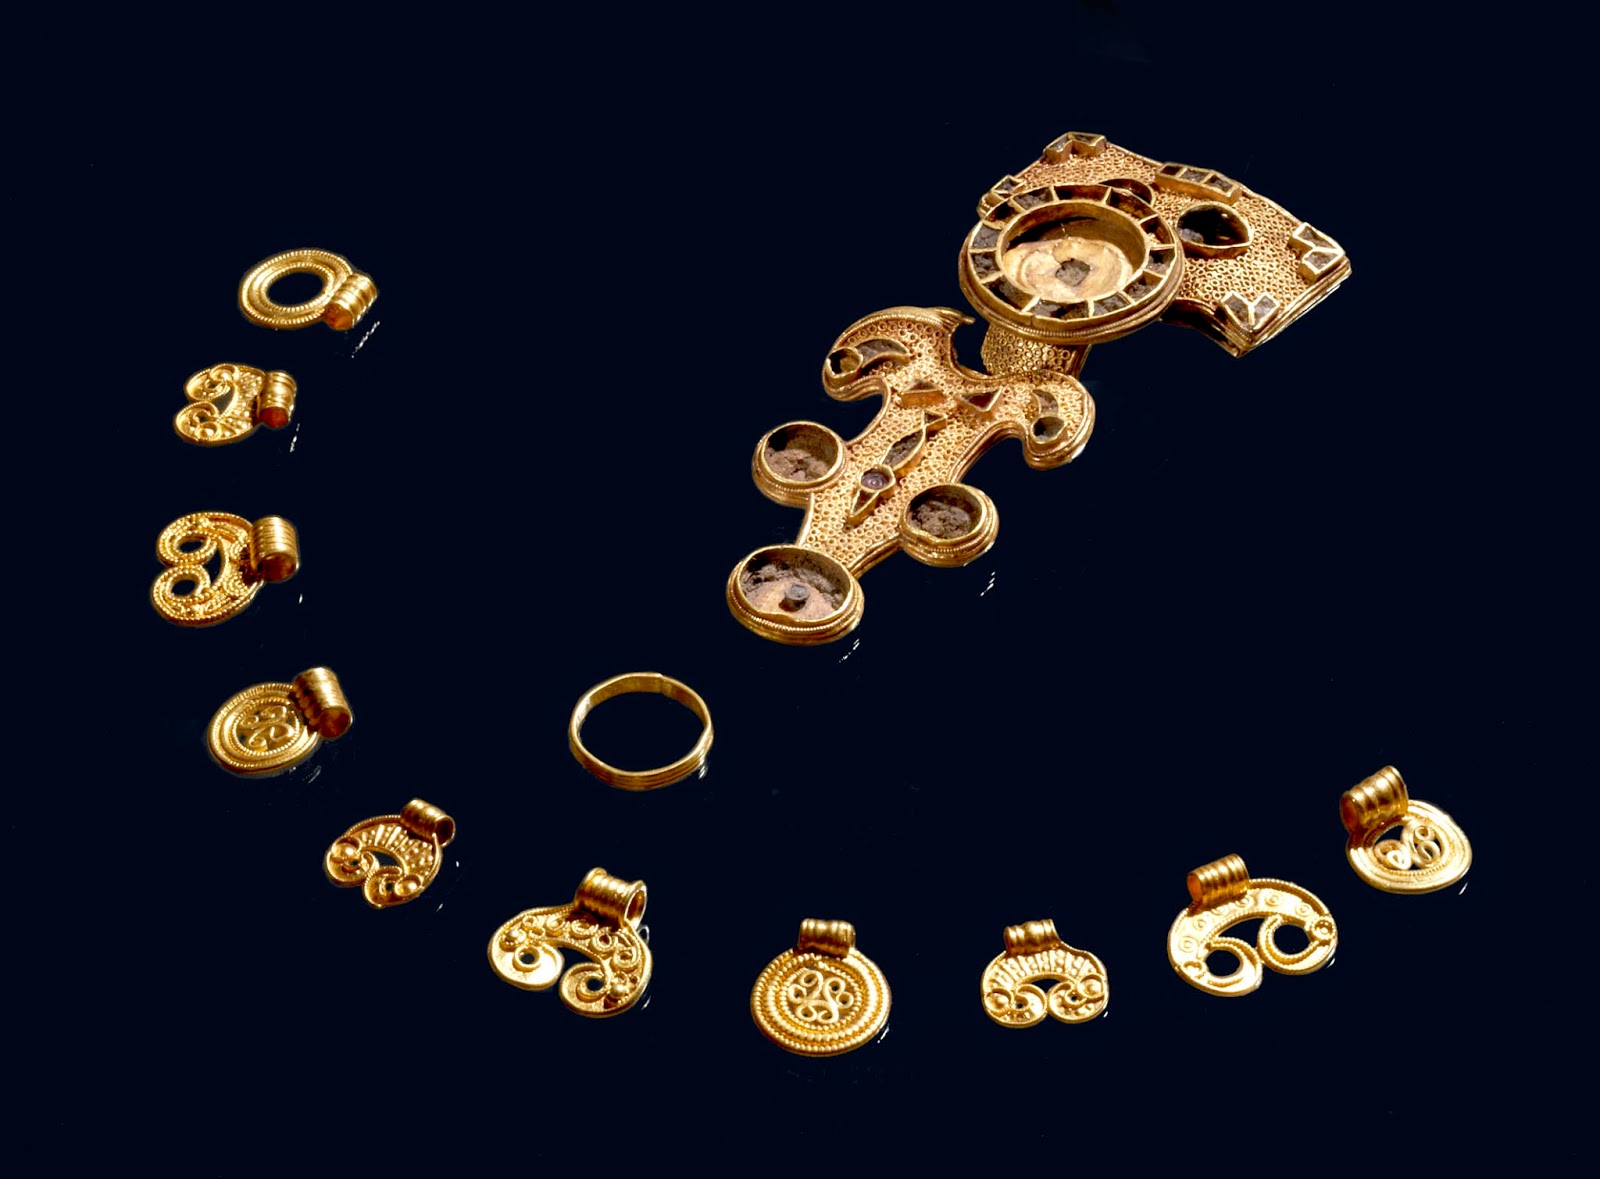 Estimate of price of silver and gold in Viking Age – Ancient Finances